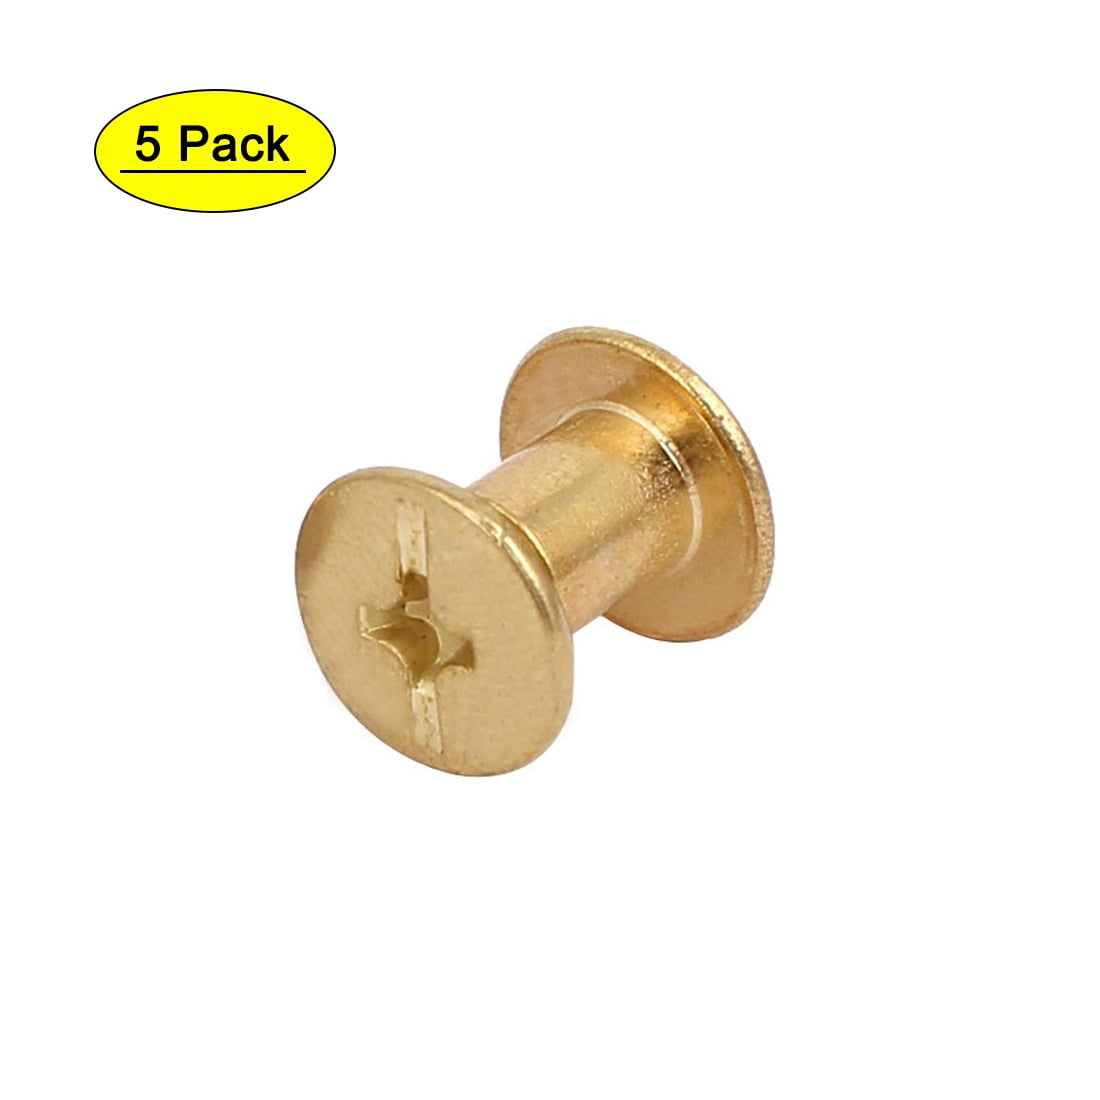 uxcell 5mmx6mm Binding Chicago Screw Posts Nuts Docking Rivets Brass Tone 15pcs